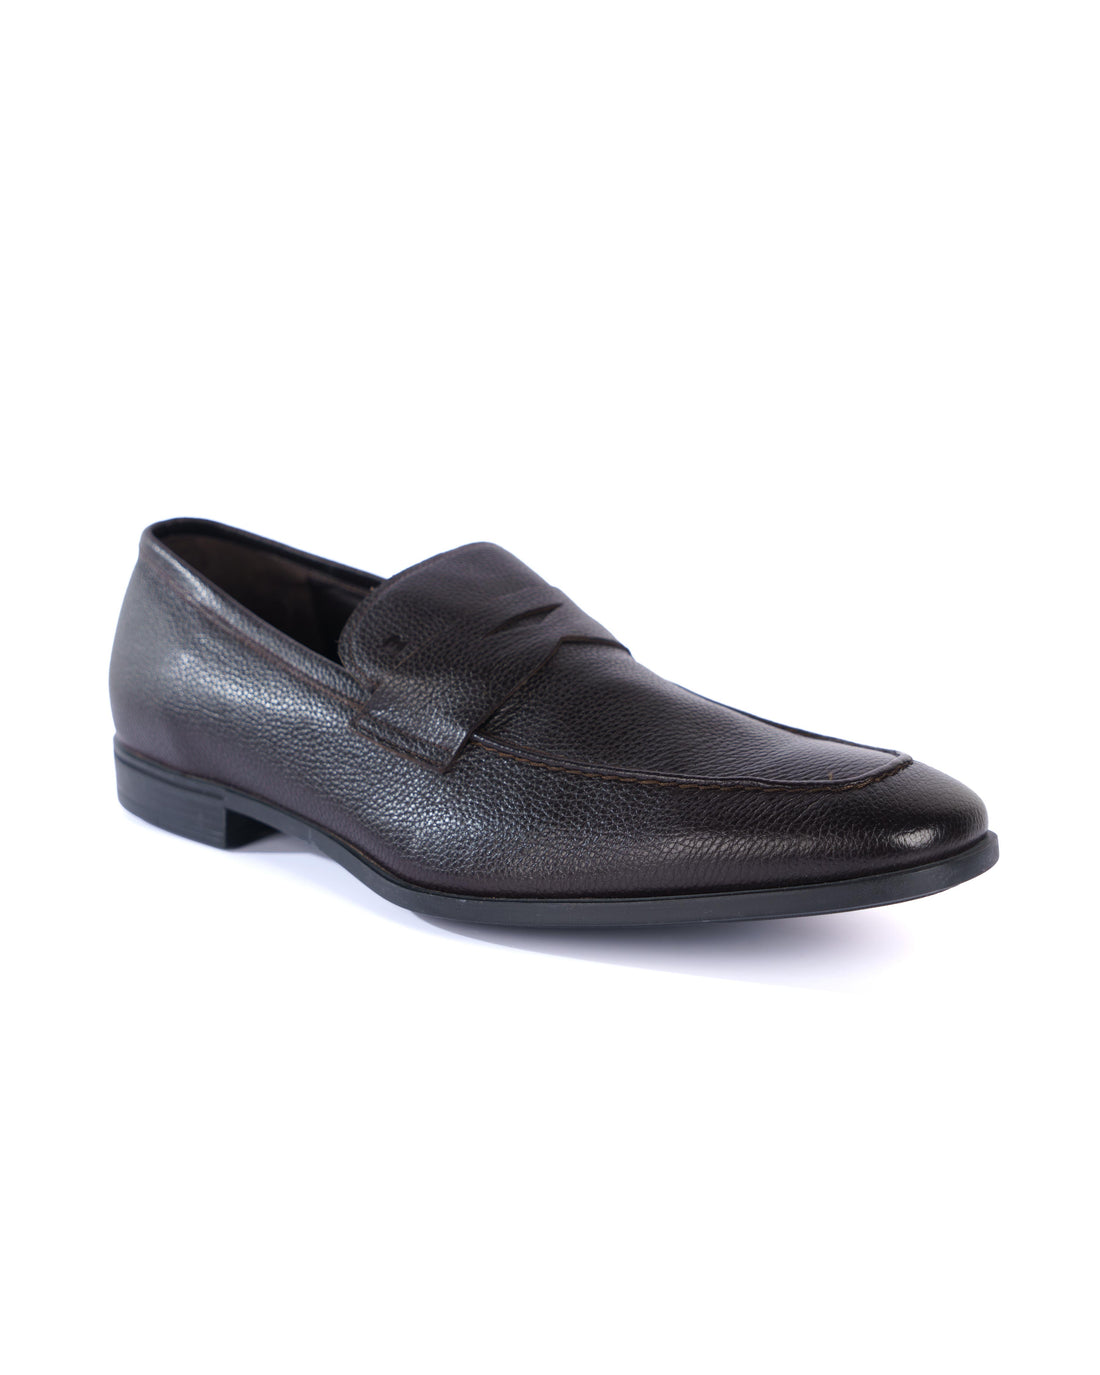 Grey Loafer Shoes